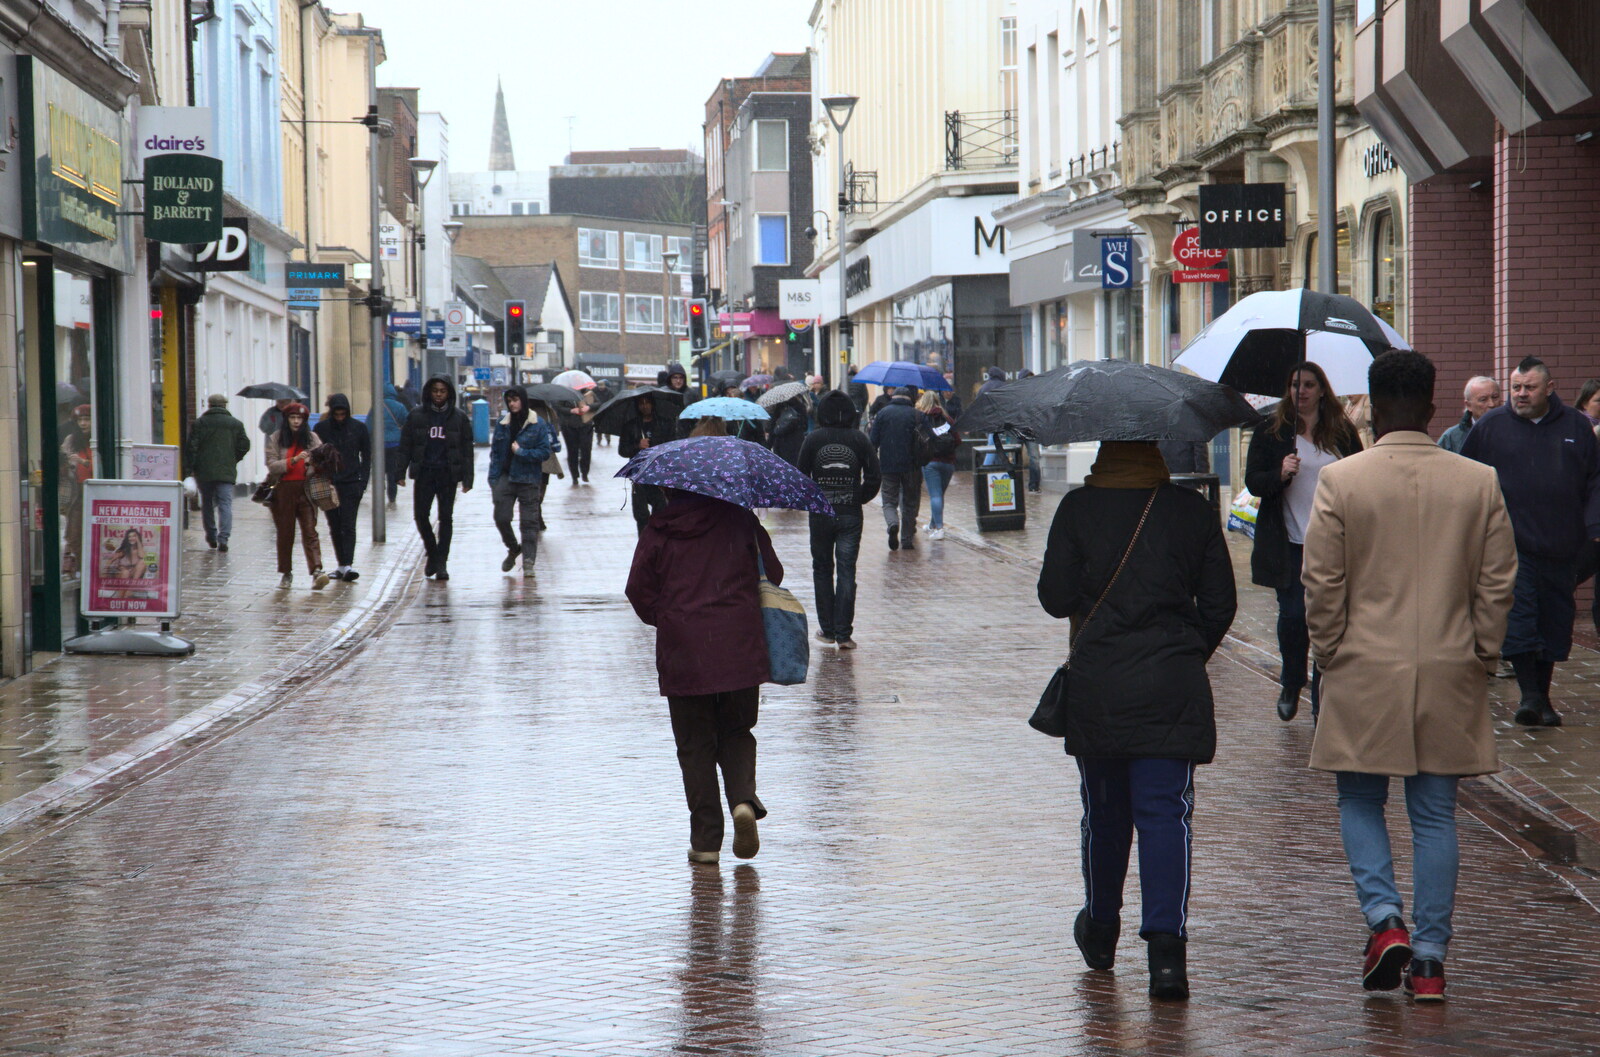 More umbrellas on Westgate Street from Fred's Flute Exam, Ipswich, Suffolk - 5th March 2020